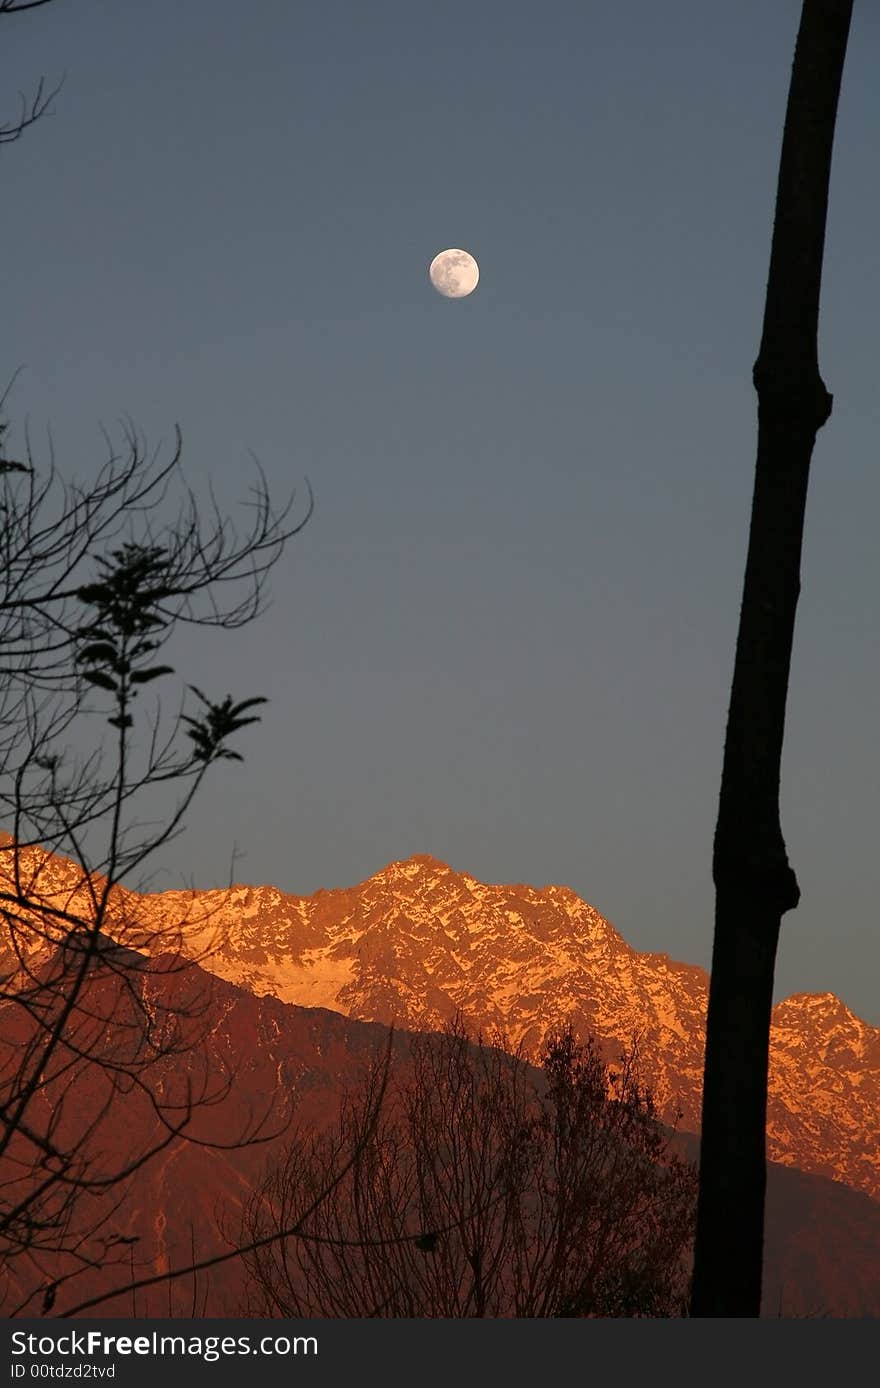 Rare image of fullmoon rise over vivid orange sunset on dhauladhar himalayan  snow peaks and mountains  as  viewed from kangra valley india. Rare image of fullmoon rise over vivid orange sunset on dhauladhar himalayan  snow peaks and mountains  as  viewed from kangra valley india